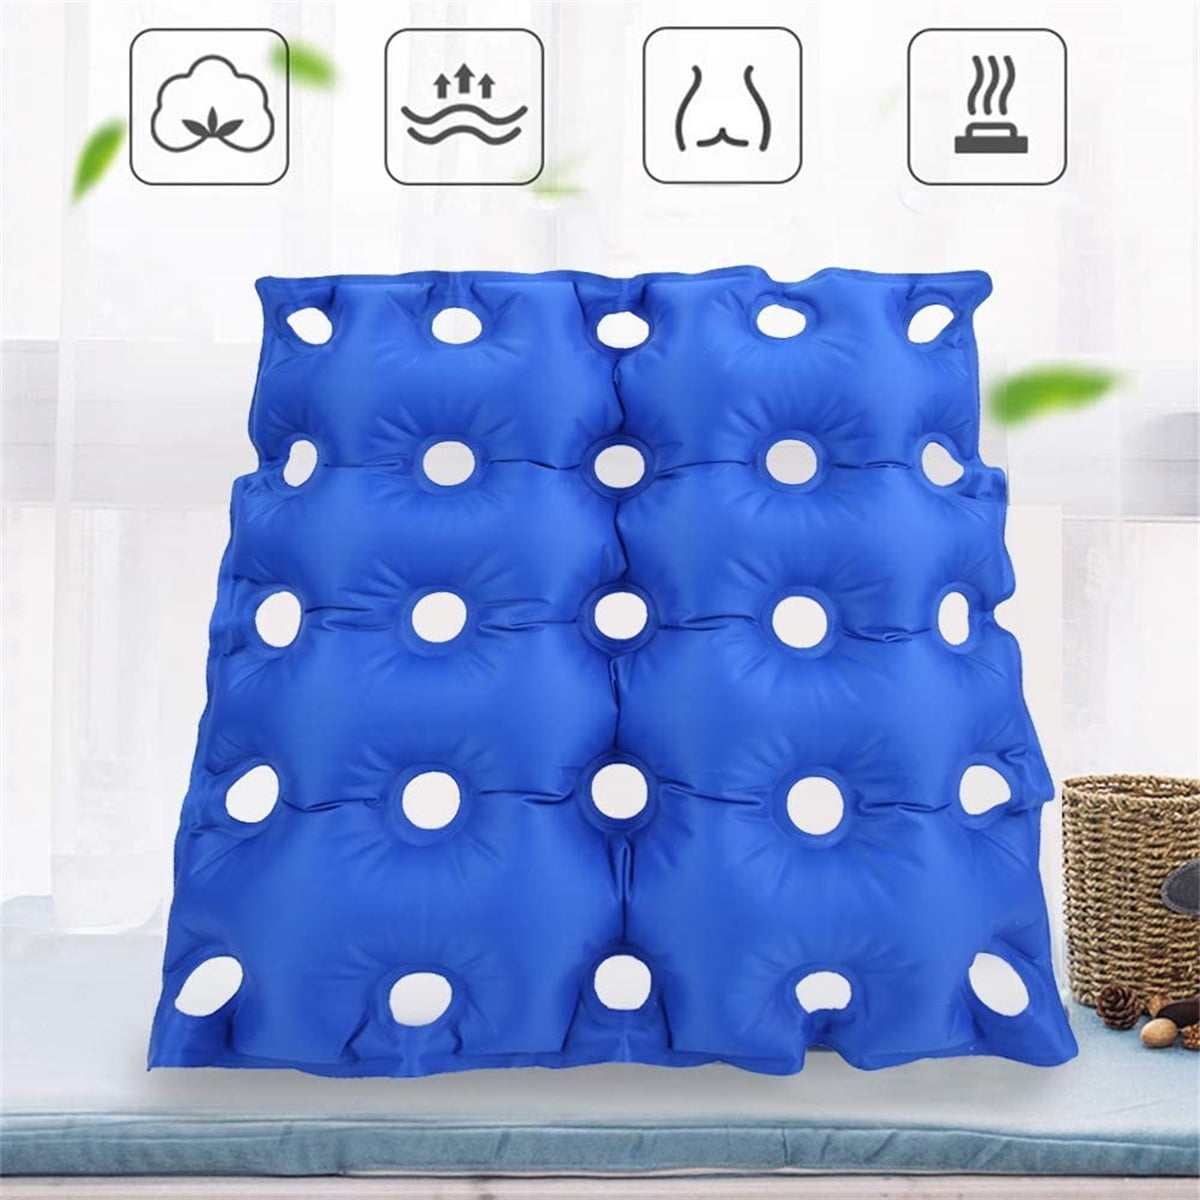 17.7 in Inflatable Seat Cushion by Happon - Blue Travel Seat Pad for  Airplane, Car, Office, Wheelchair - Adjustable Pressure Pillow for Sitting  Pain